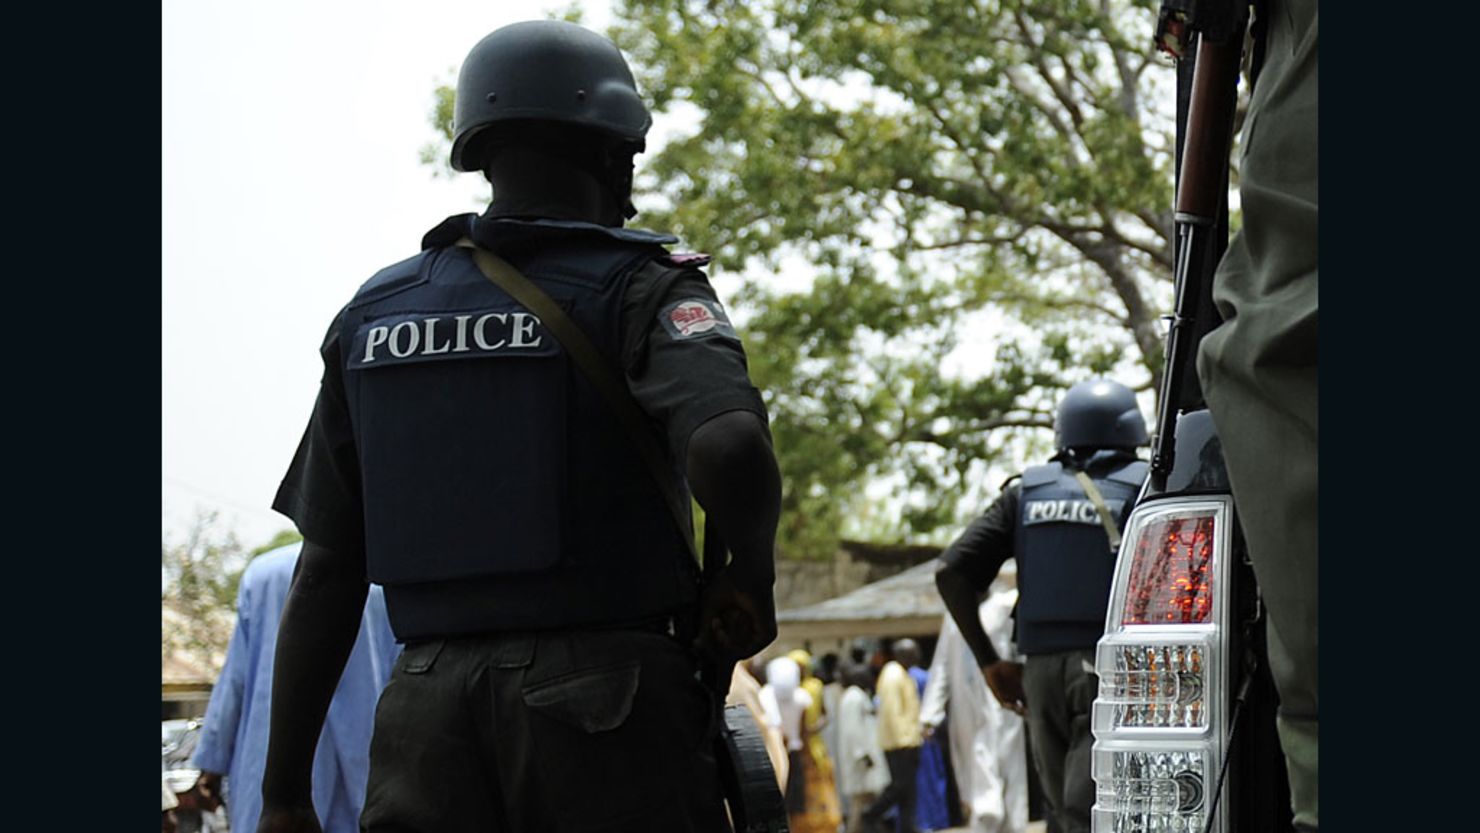 Nigerian police are seen in a file photo taken in northern Nigeria.